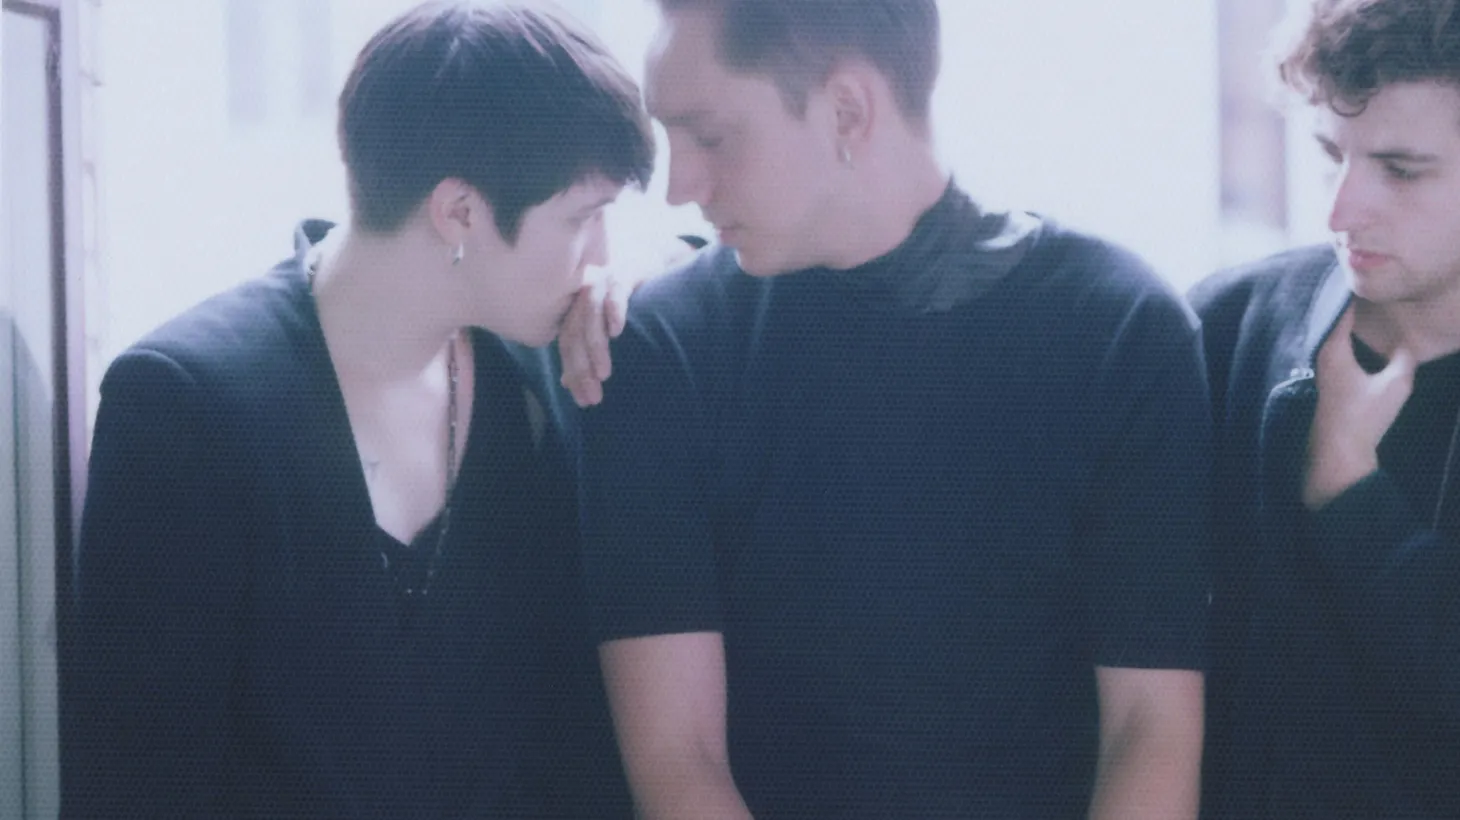 One of the most exciting bands of the last few years, The xx, are finally back with new music.